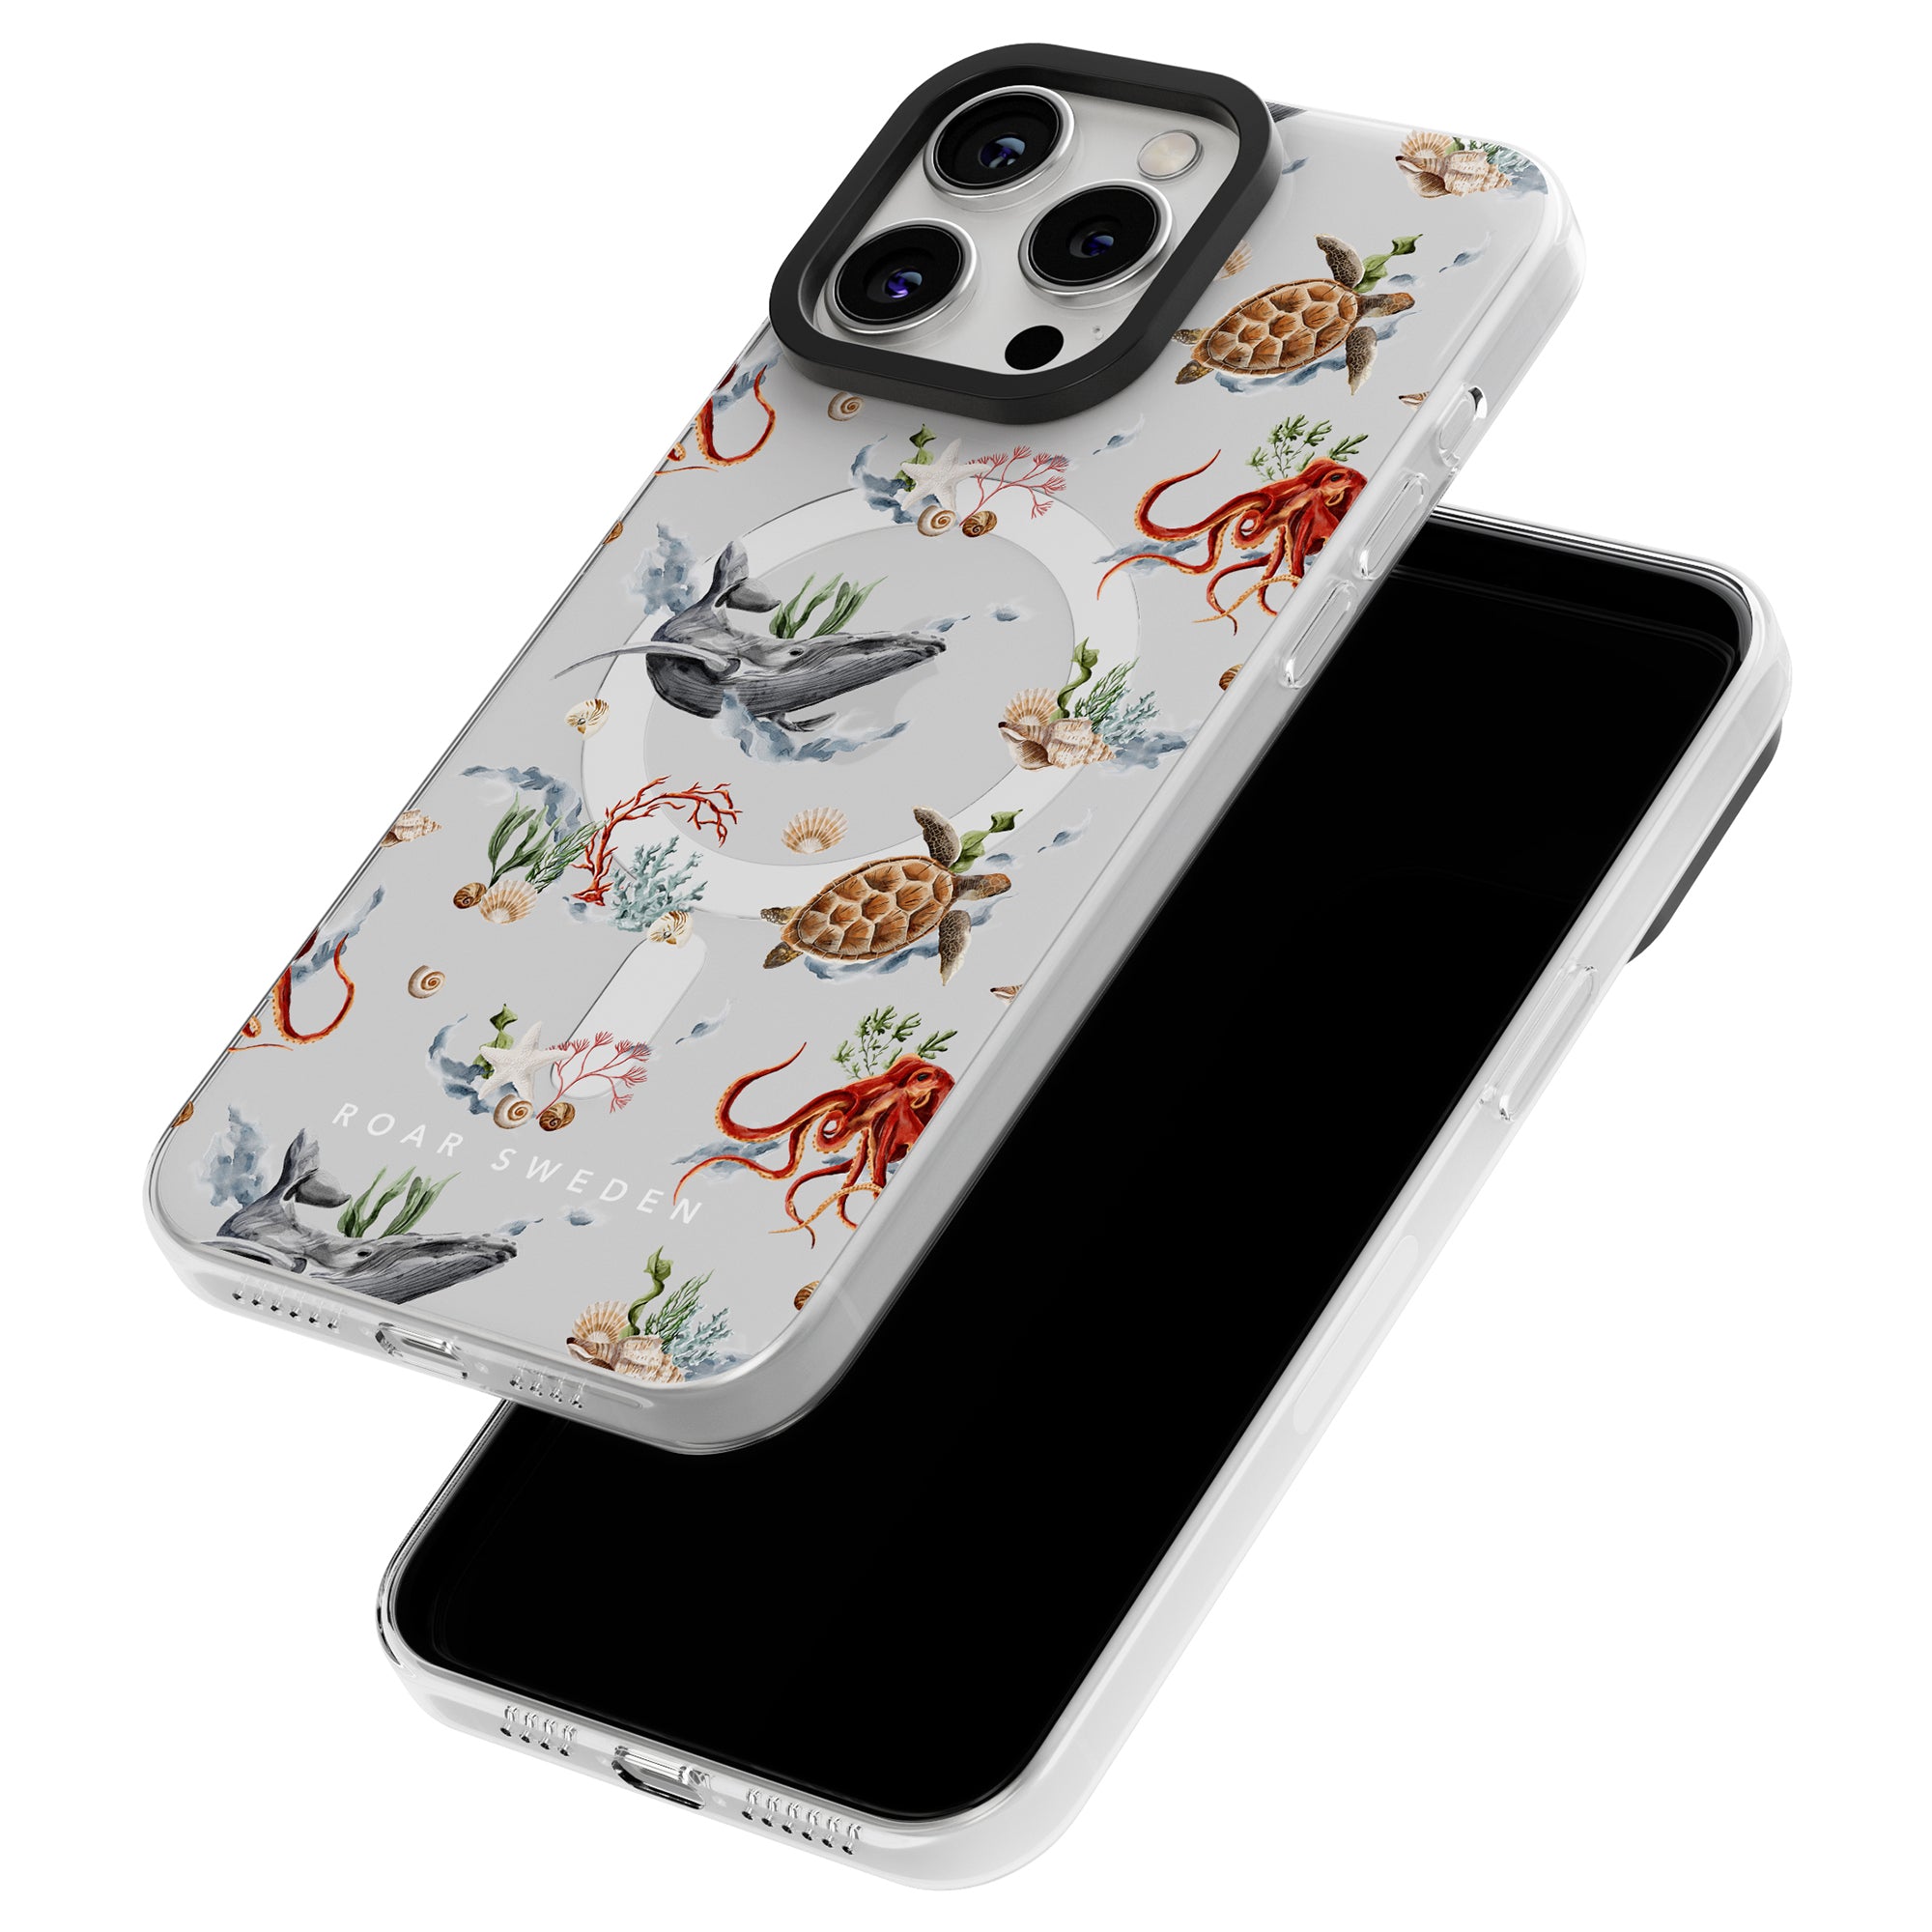 Two smartphone cases from the Ocean Collection with sea creature designs, one positioned above the other. The visible Deep - MagSafe features a gray background adorned with illustrations of whales, turtles, octopuses, and various sea plants.